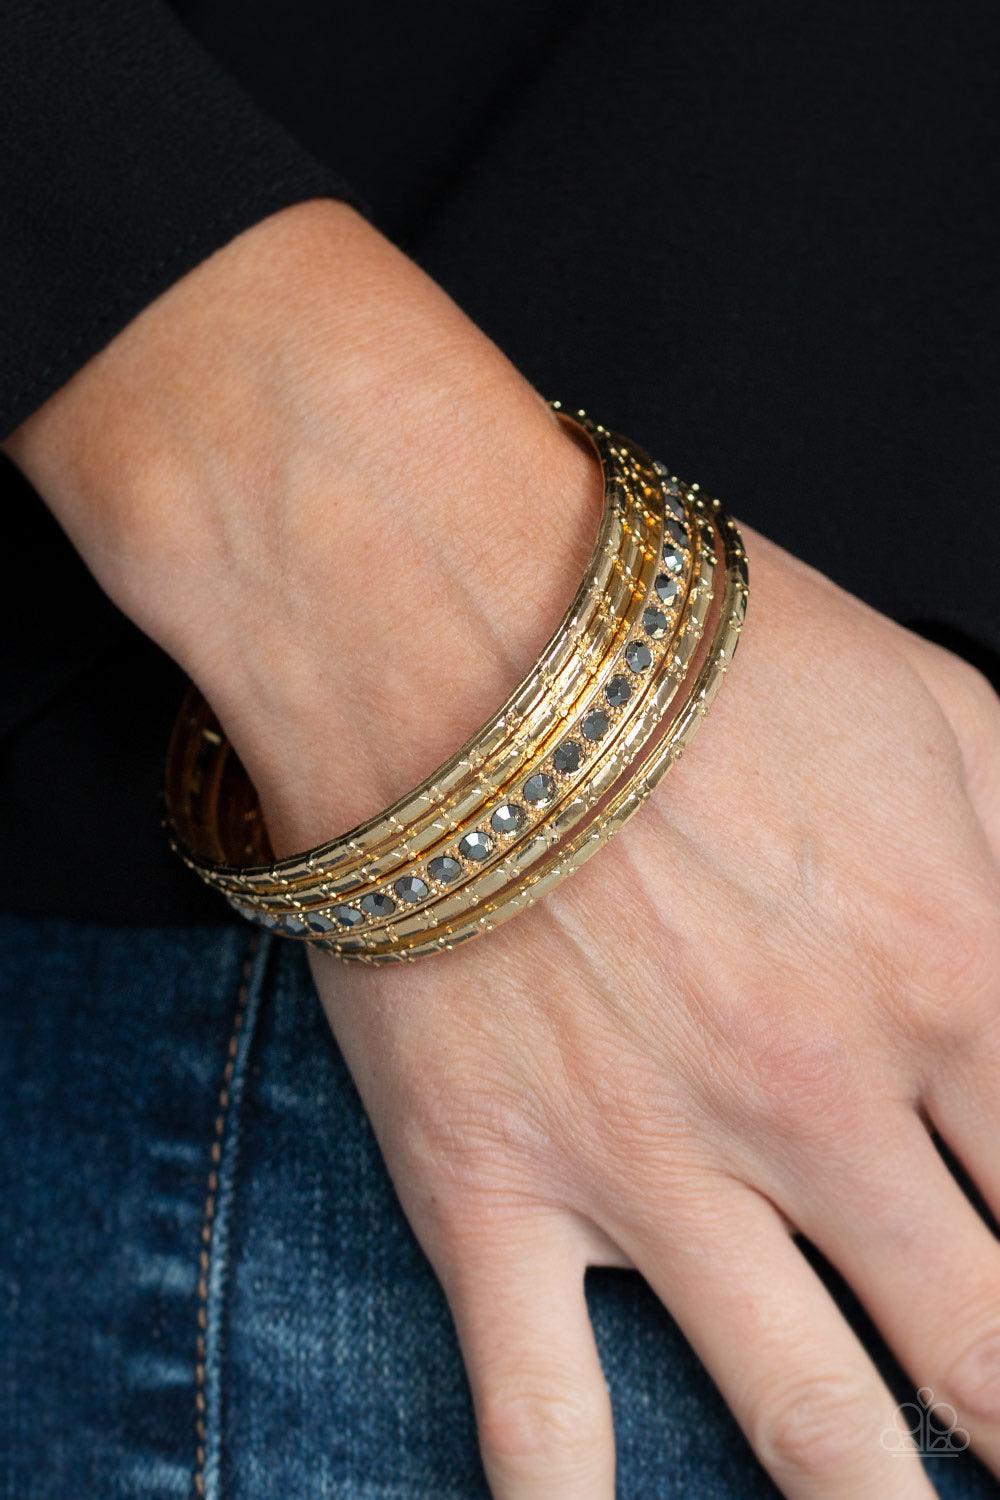 Paparazzi Accessories Glitzy Grunge - Gold A single hematite rhinestone encrusted bangle joins four textured gold bangles, creating an edgy stack of shimmer across the wrist. Jewelry